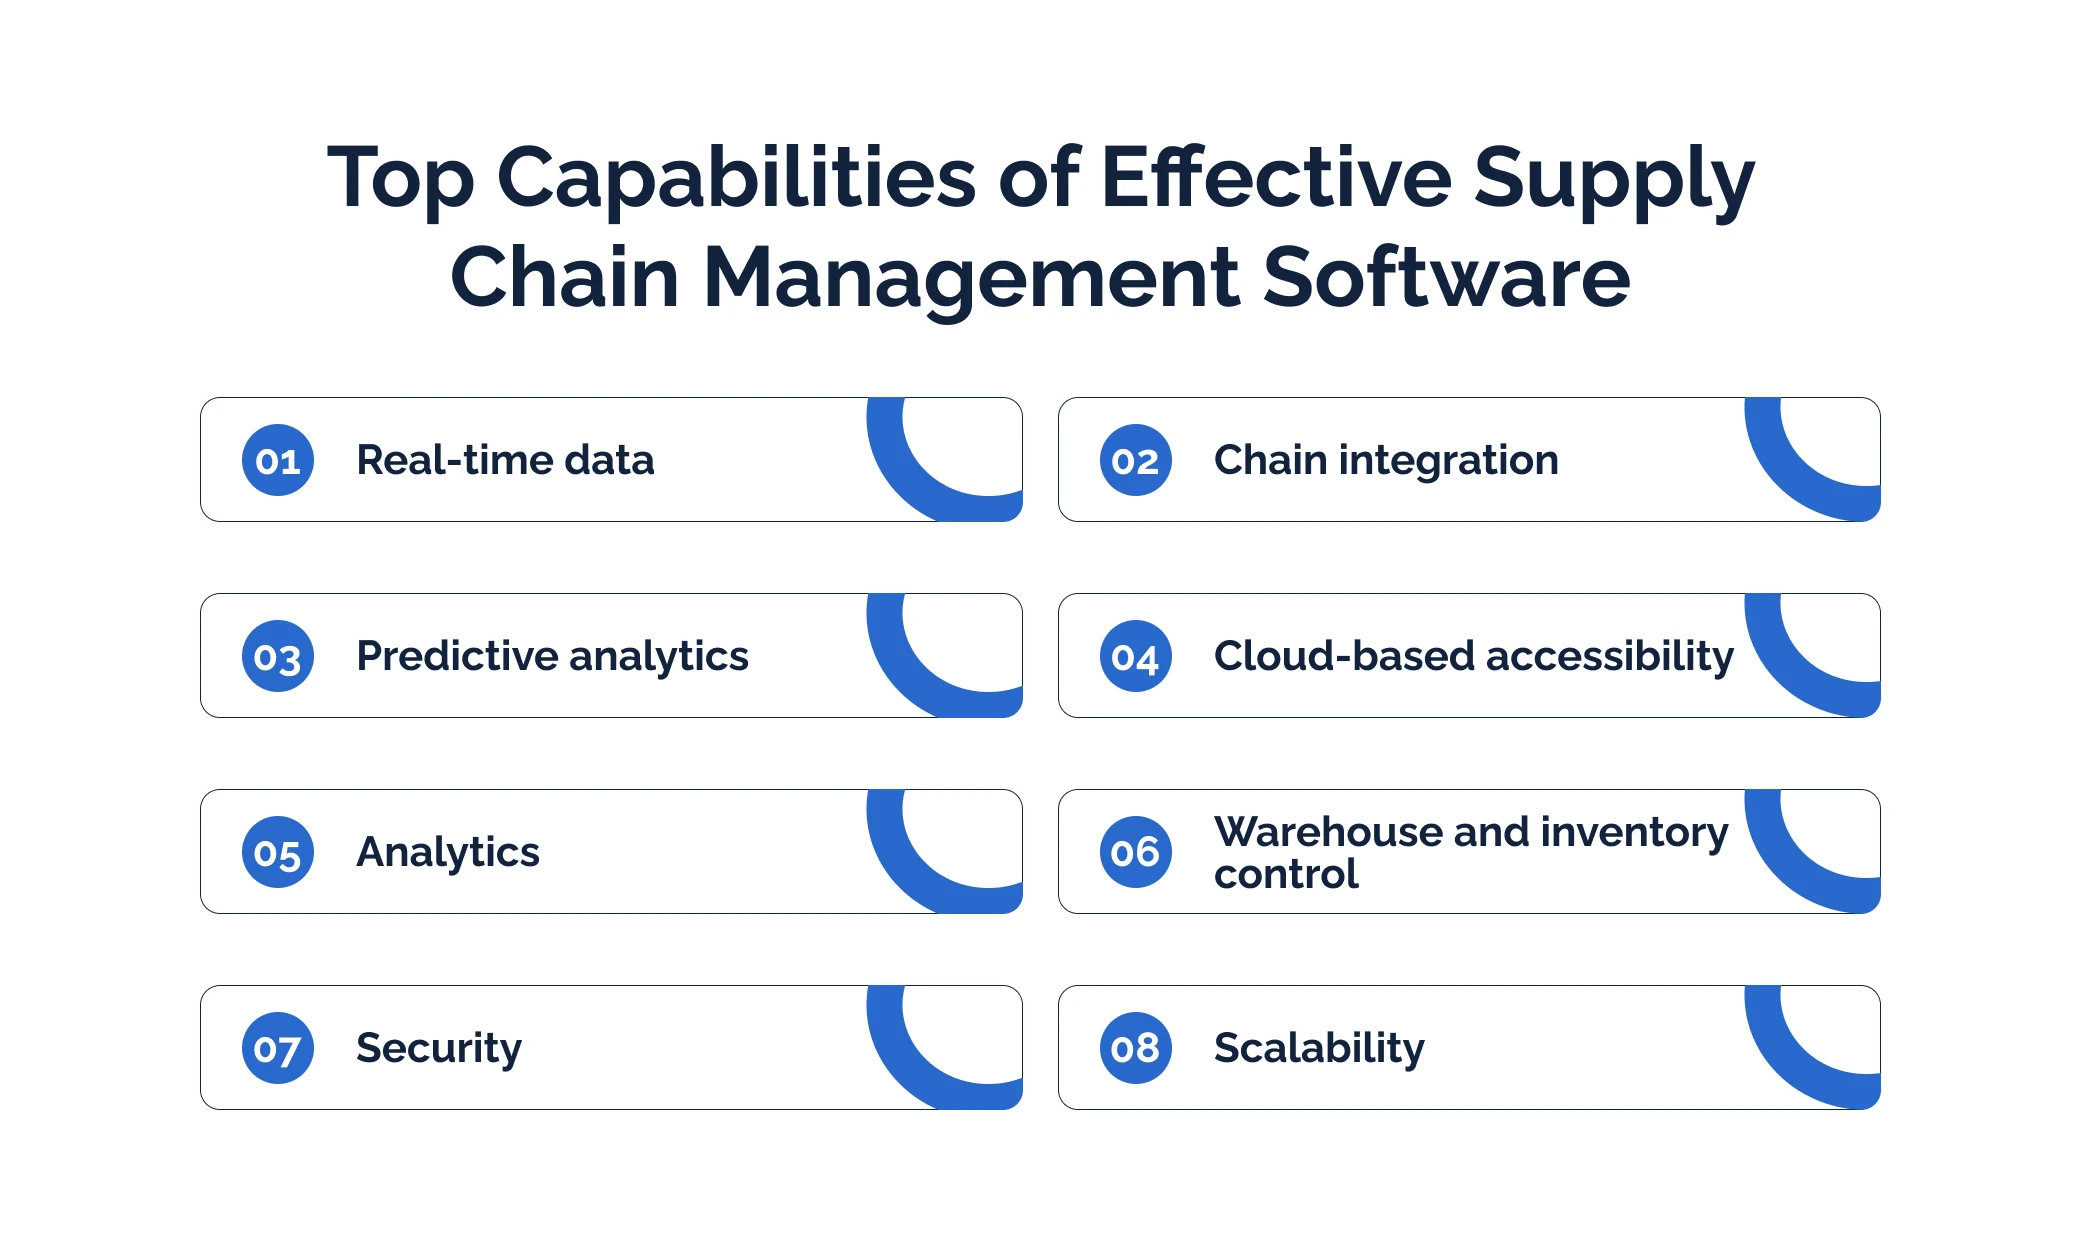 Top Capabilities of Effective Supply Chain Management Software